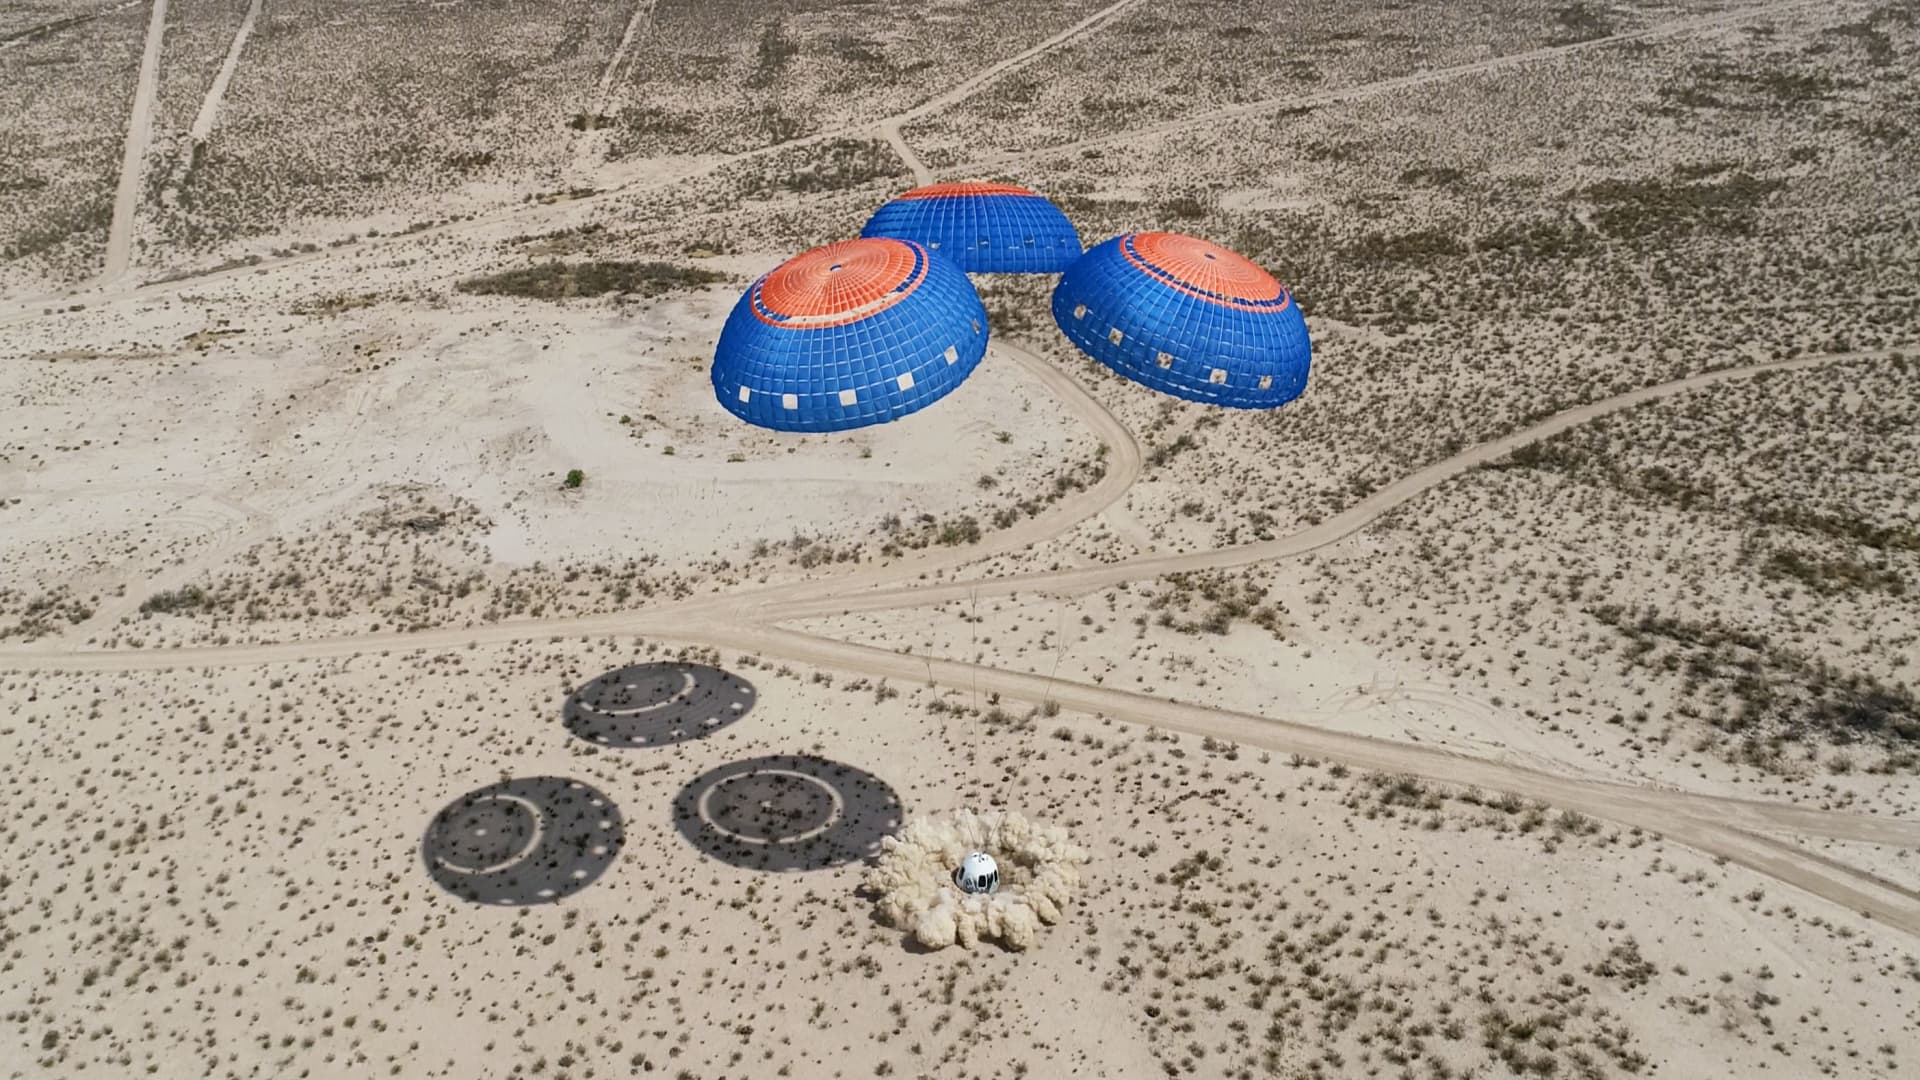 The New Shepard crew capsule lands in the West Texas desert after the NS-15 mission on April 14, 2021.